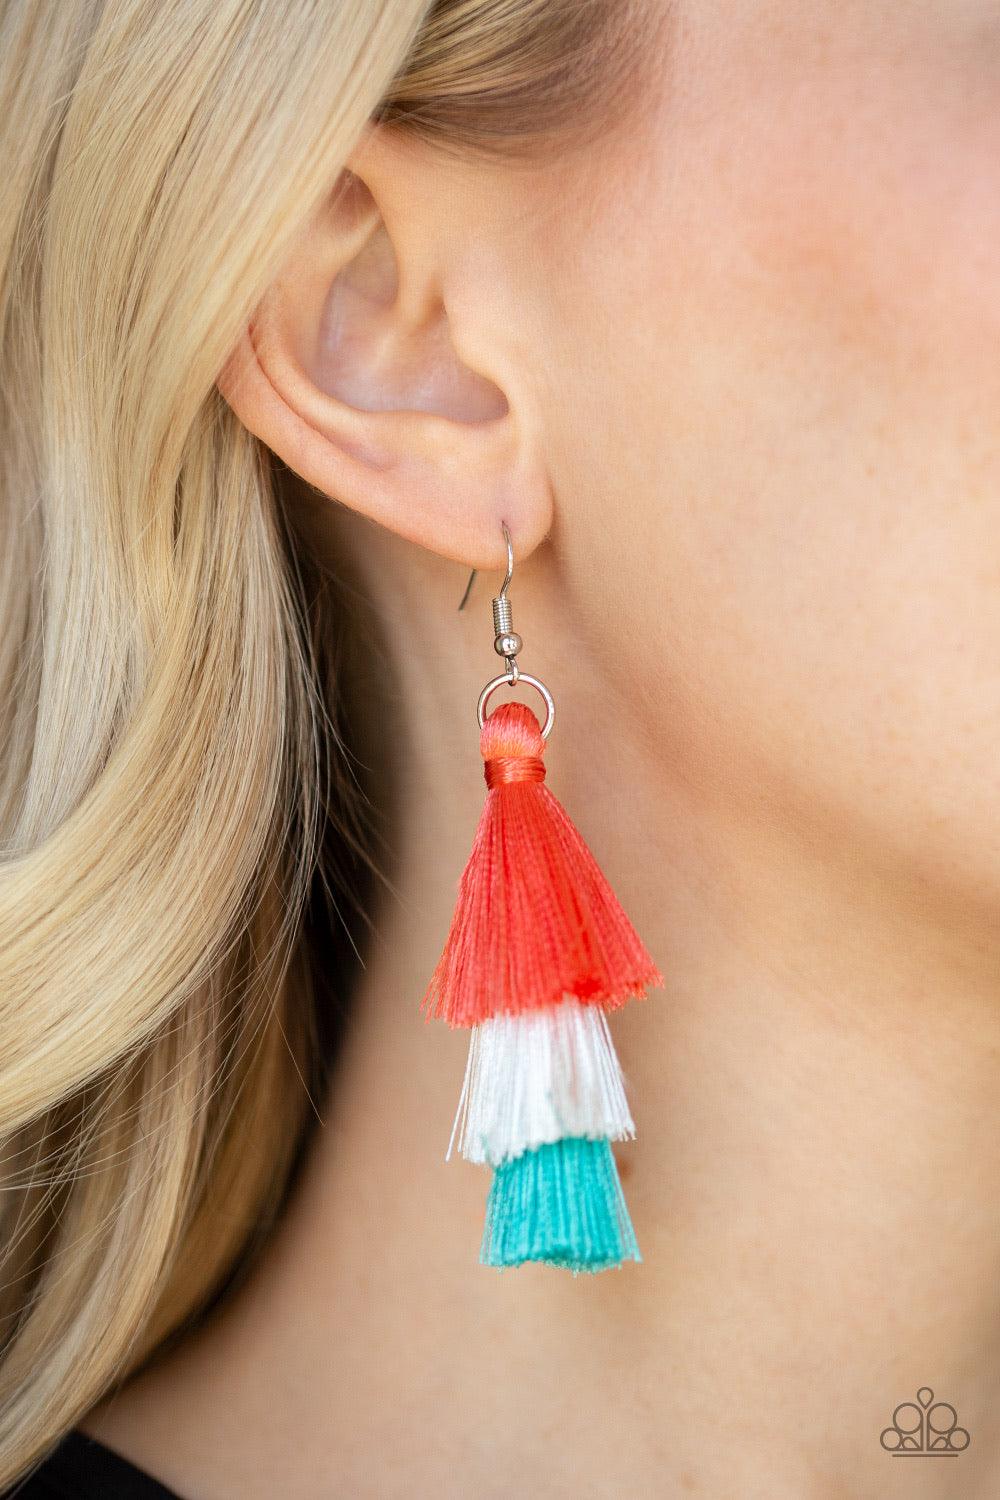 Paparazzi Accessories Hold On To Your Tassel! - Orange Featuring coral, white, and blue thread, a 3-tiered tassel swings from the ear for a flirtatious look. Earring attaches to a standard fishhook fitting. Jewelry